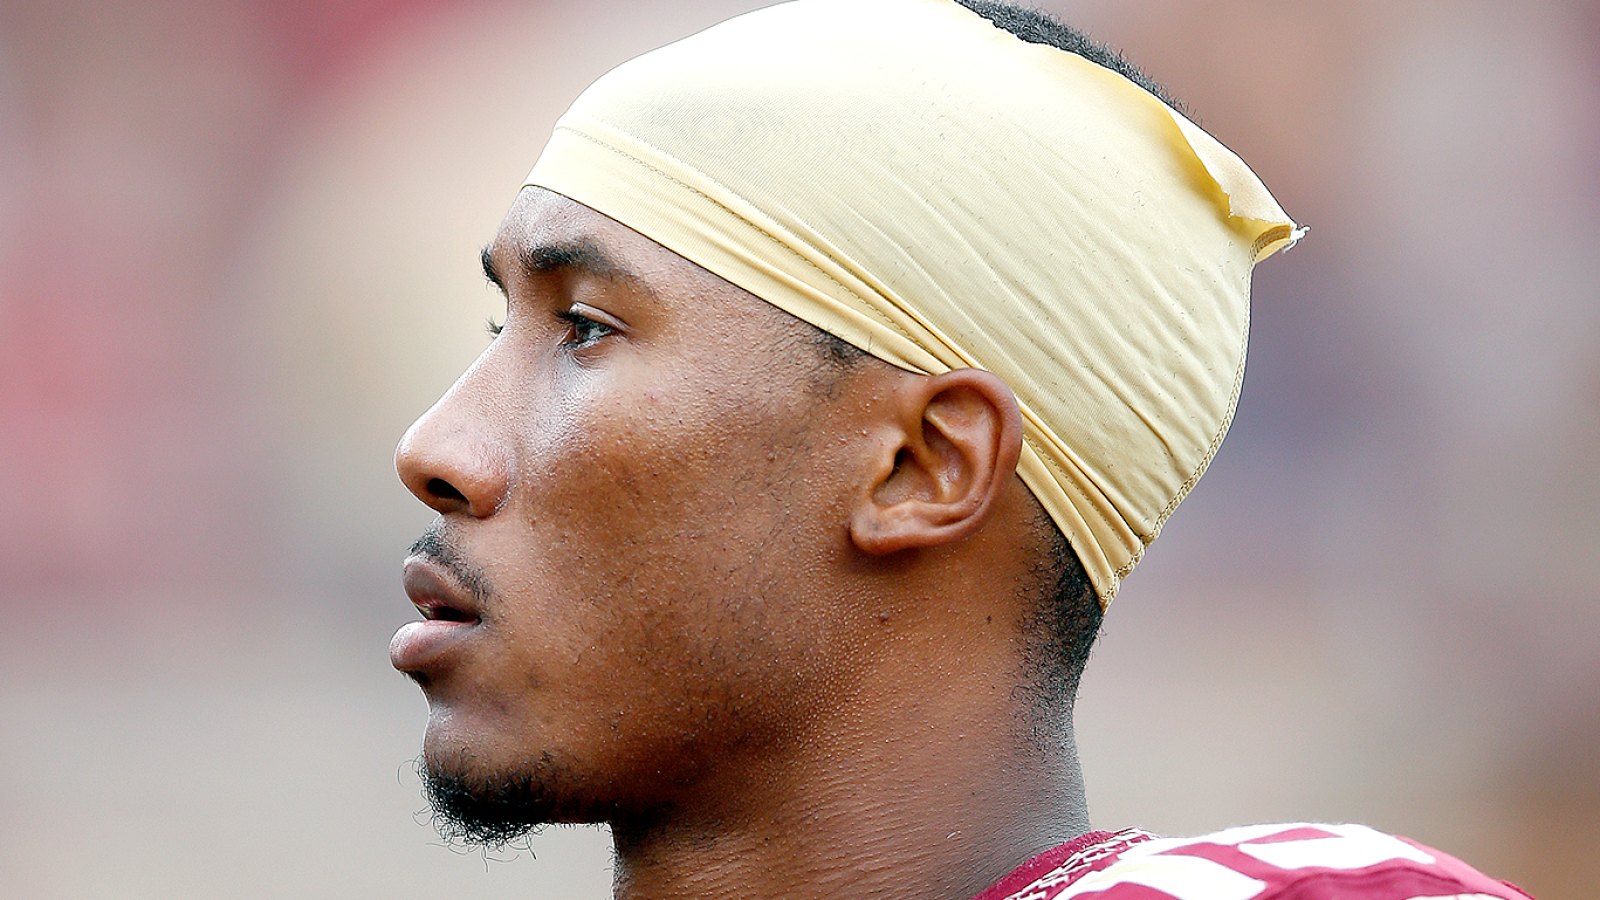 Travis Rudolph #15 of the Florida State Seminoles looks on against the South Florida Bulls during the game at Doak Campbell Stadium on September 12, 2015 in Tallahassee, Florida.